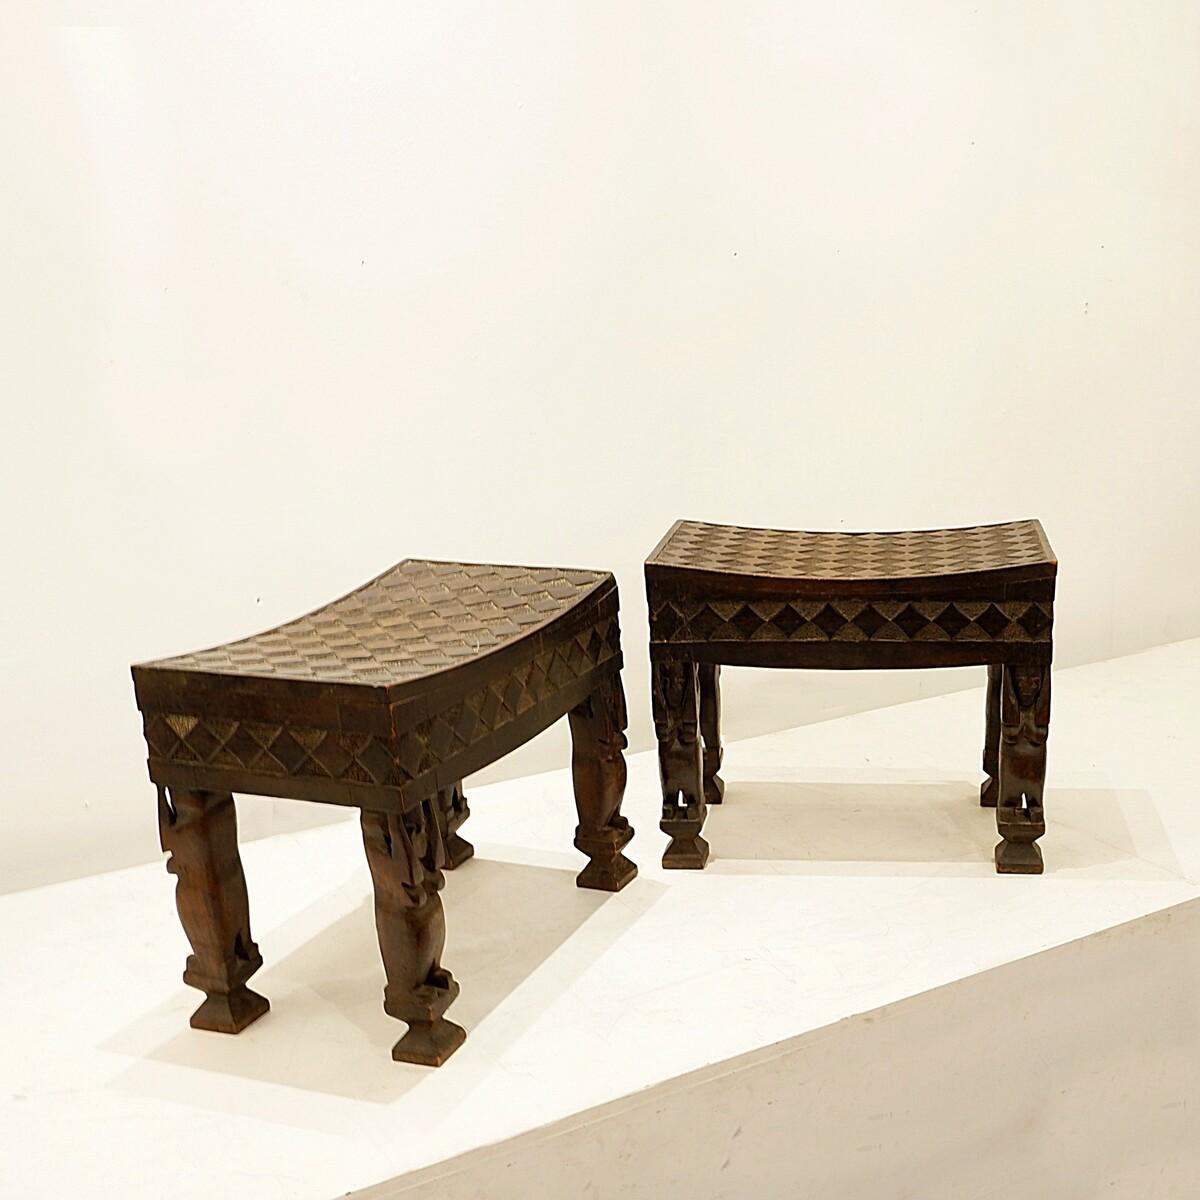 Very beautiful carved wood stools.